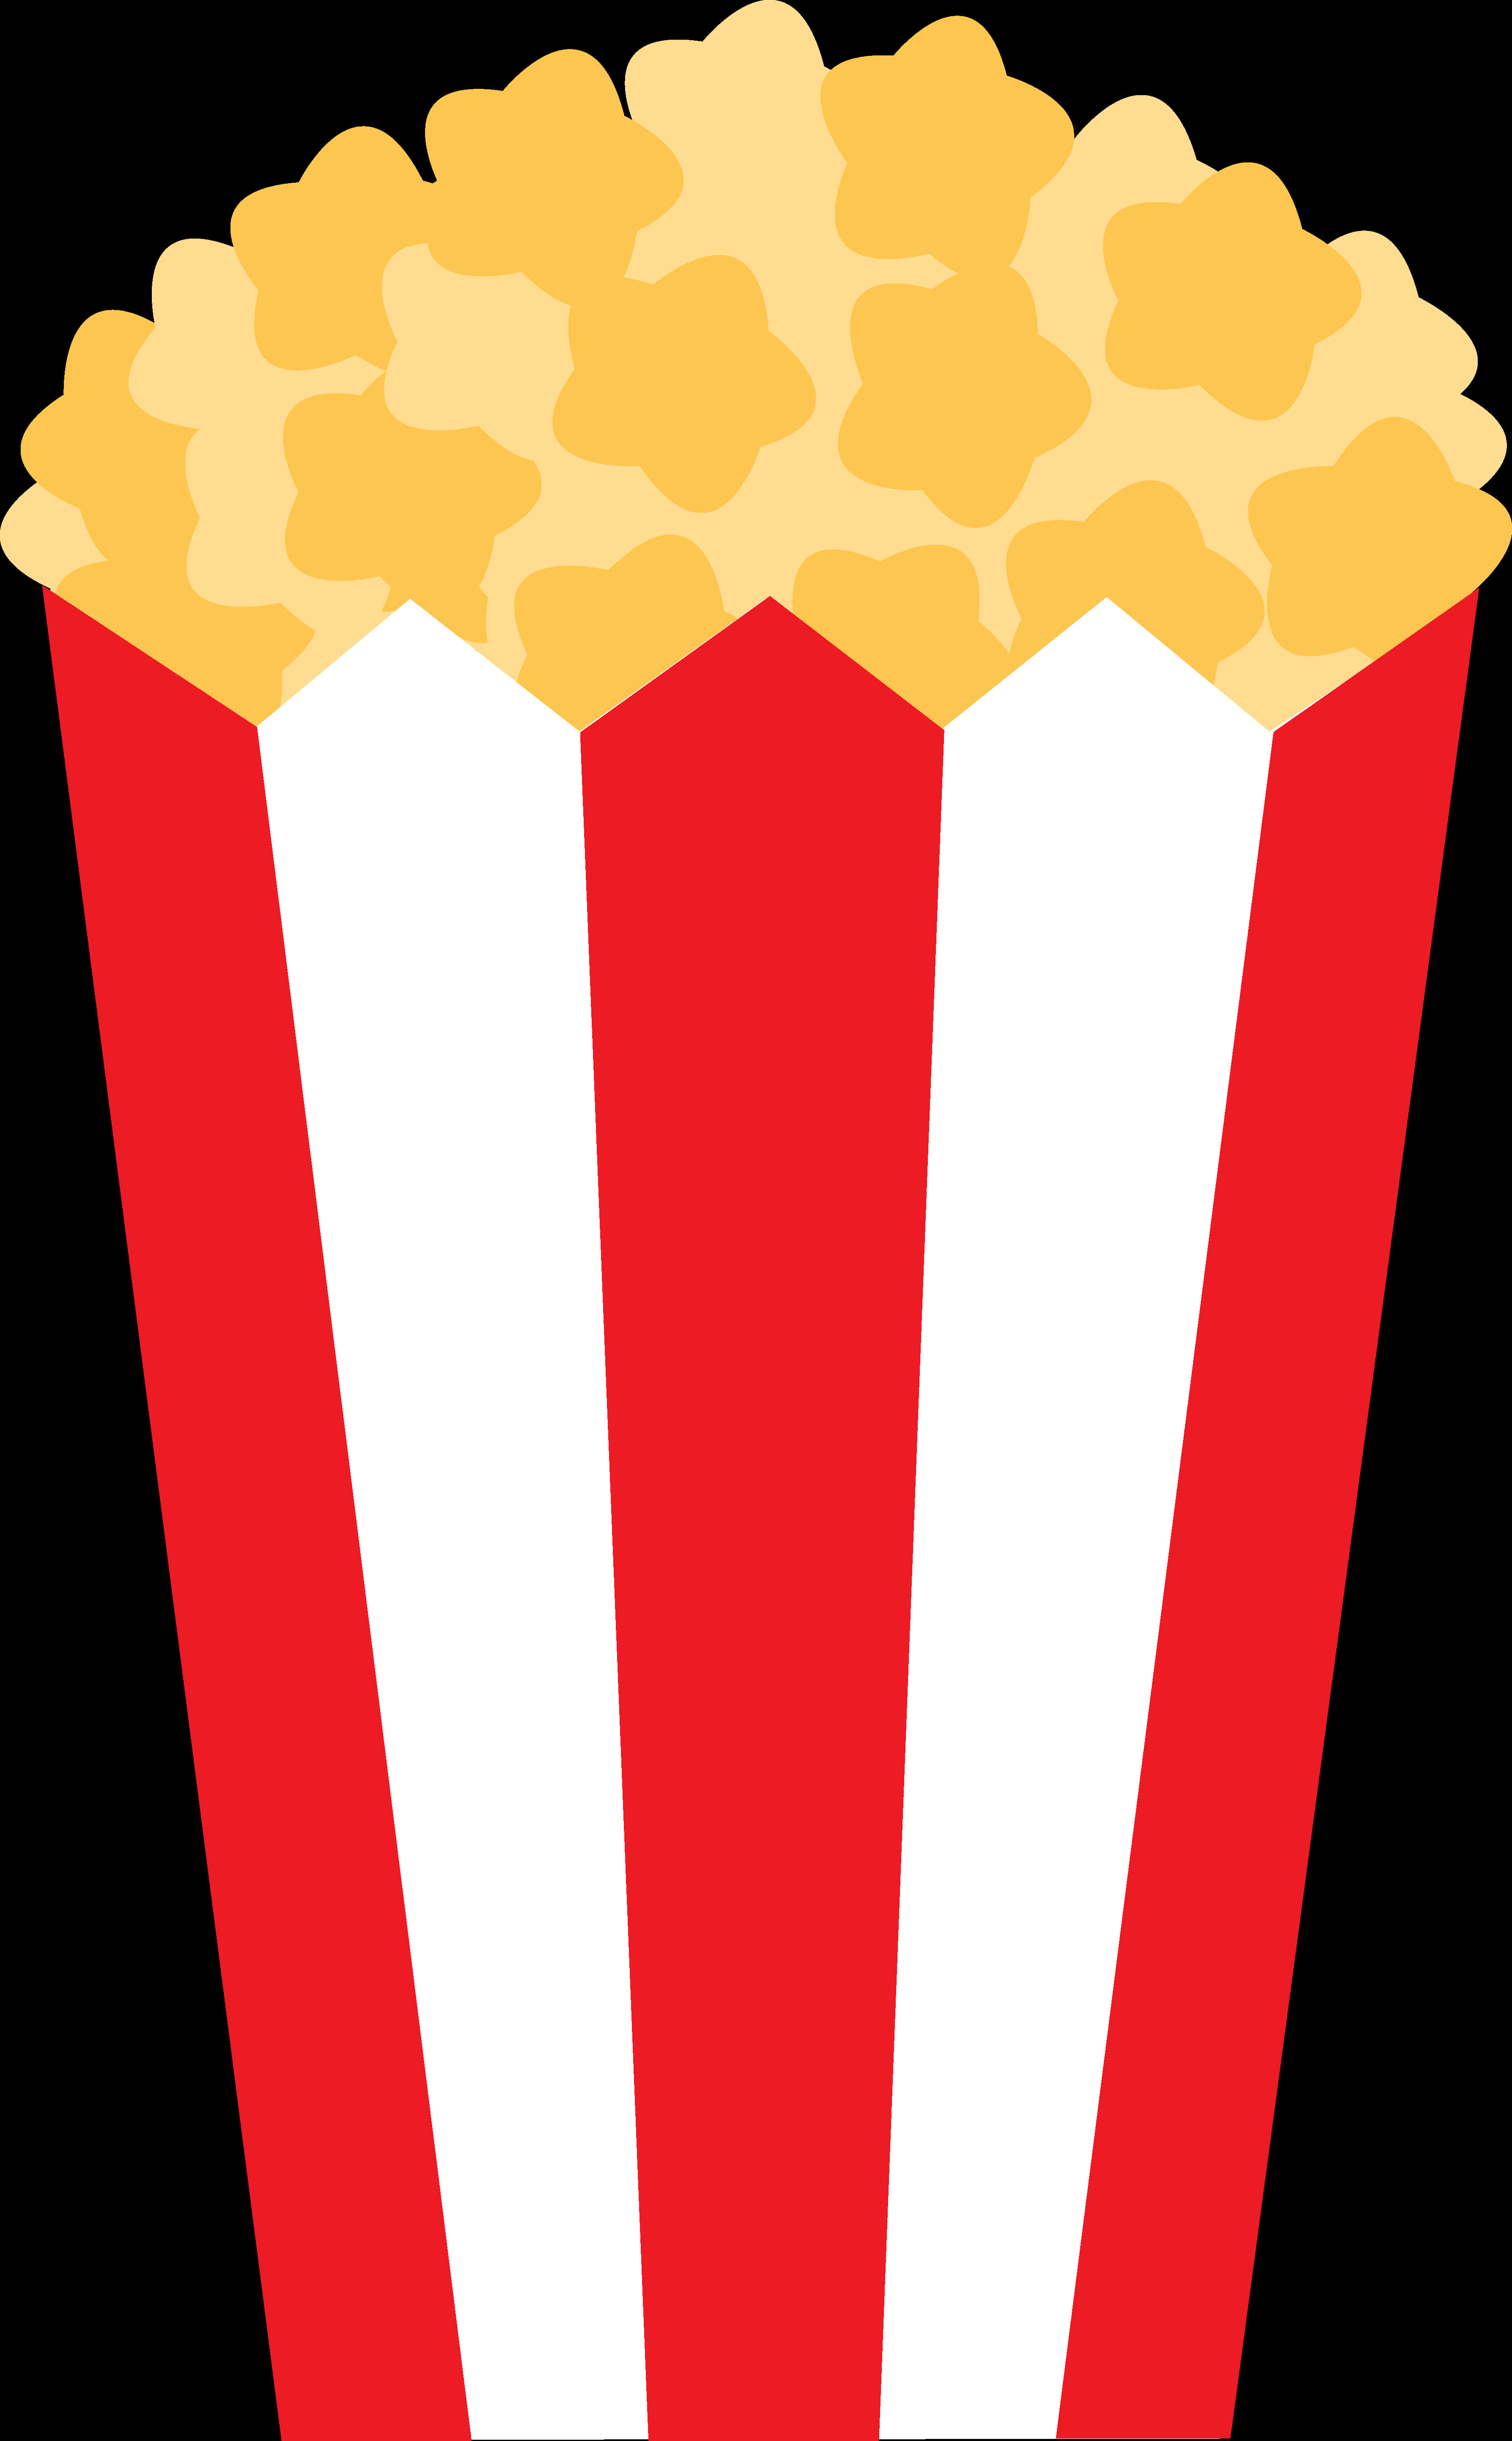 Classic Popcorn Box Clipart PNG image